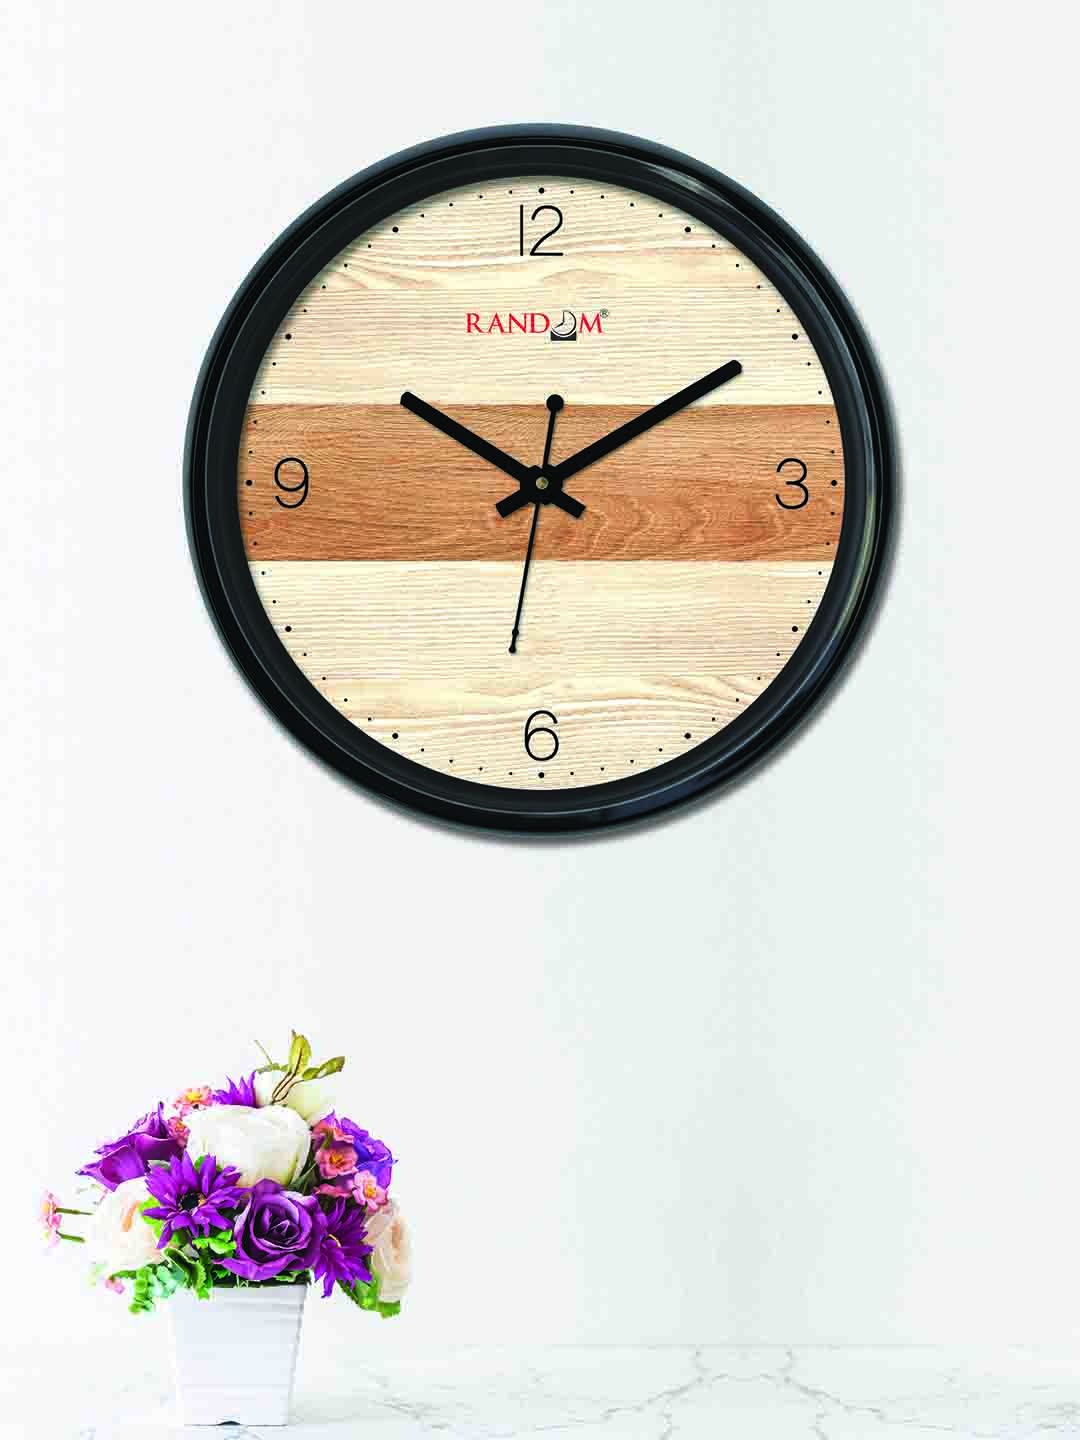 RANDOM Cream-Coloured & Brown Round Printed 30 x 30 cm Analogue Wall Clock Price in India